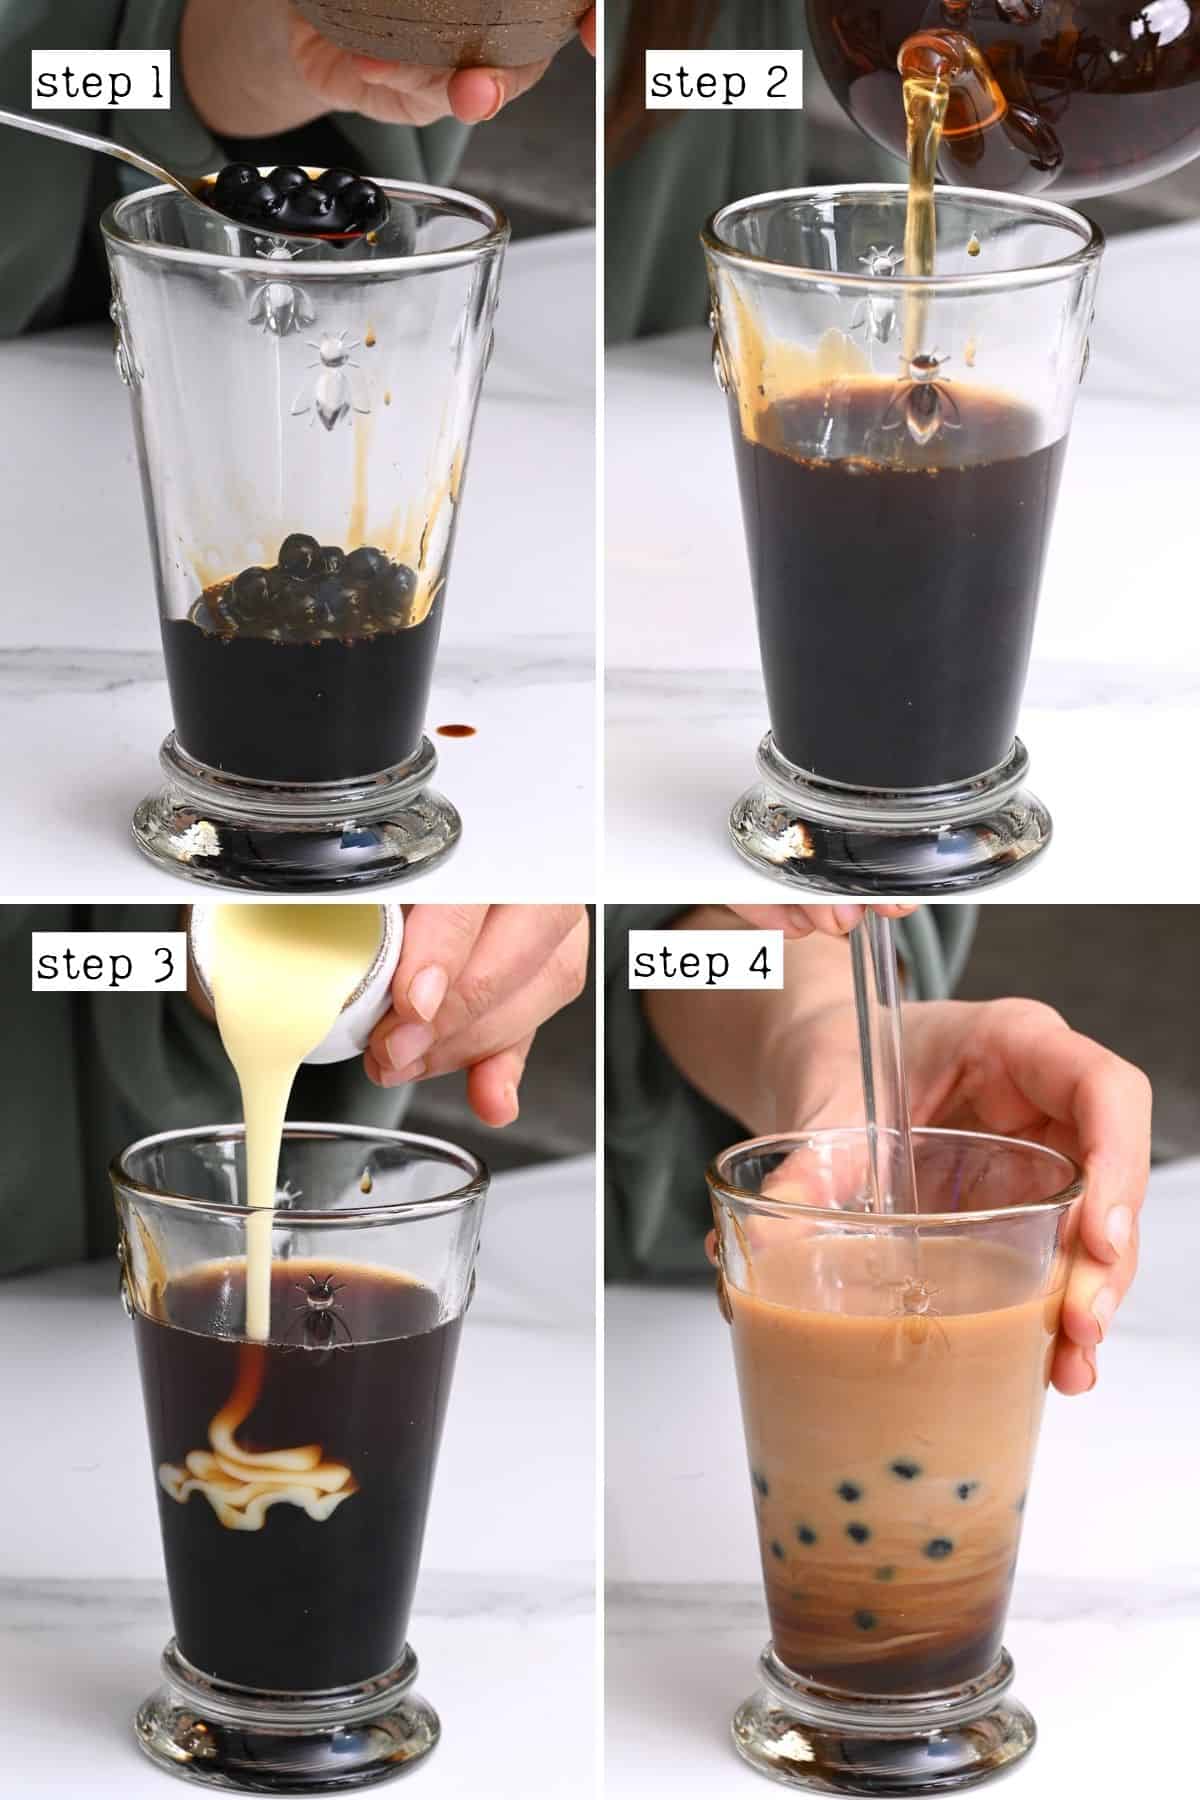 BUBBLE TEA: SHOULD YOU USE A SHAKER OR NOT? 